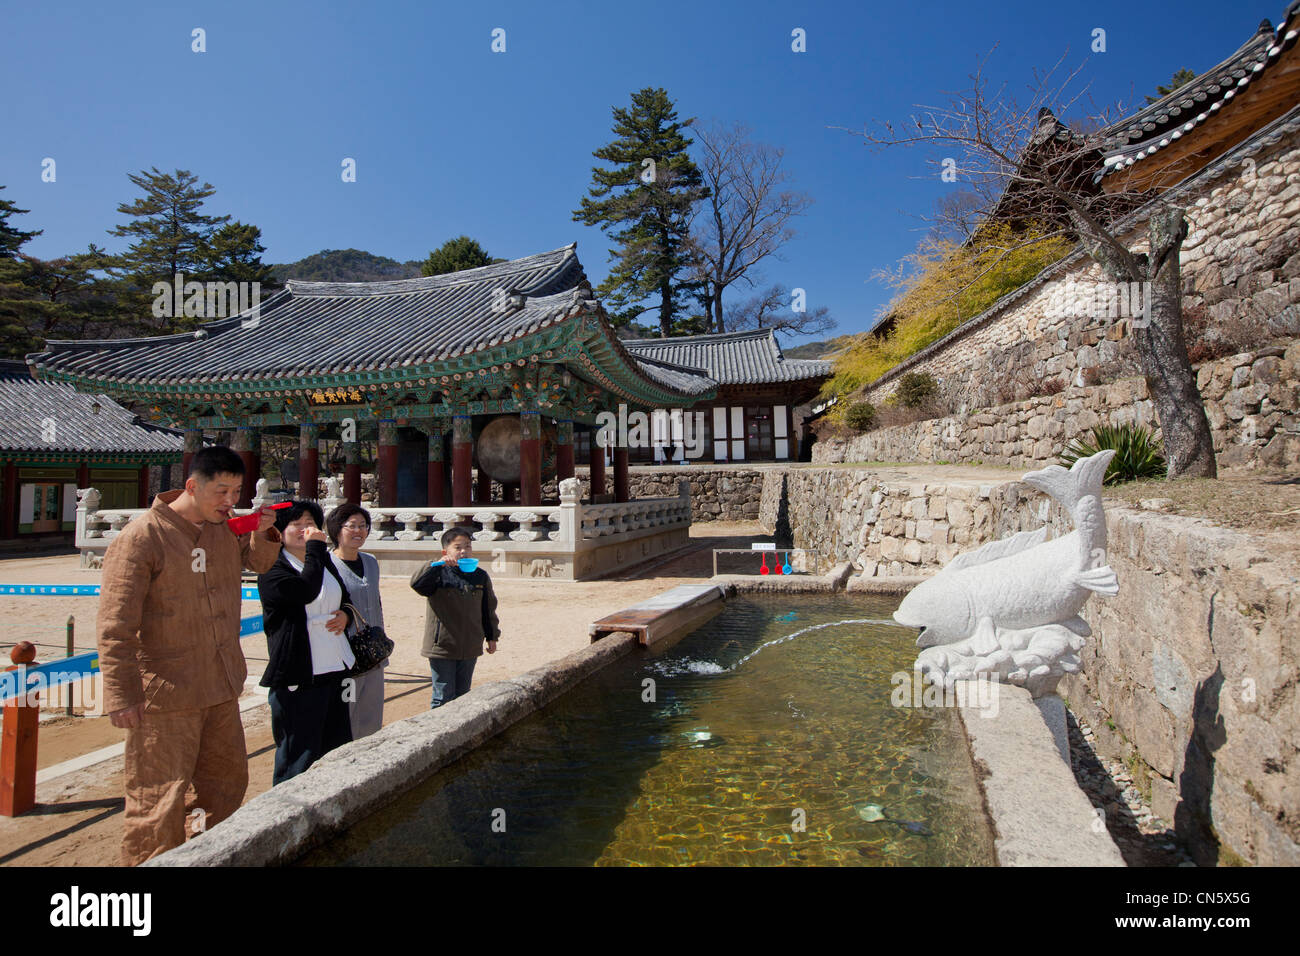 South Korea, South Gyeongsang Province, Haein Buddhist Temple, visitors drinking from the fountain Stock Photo